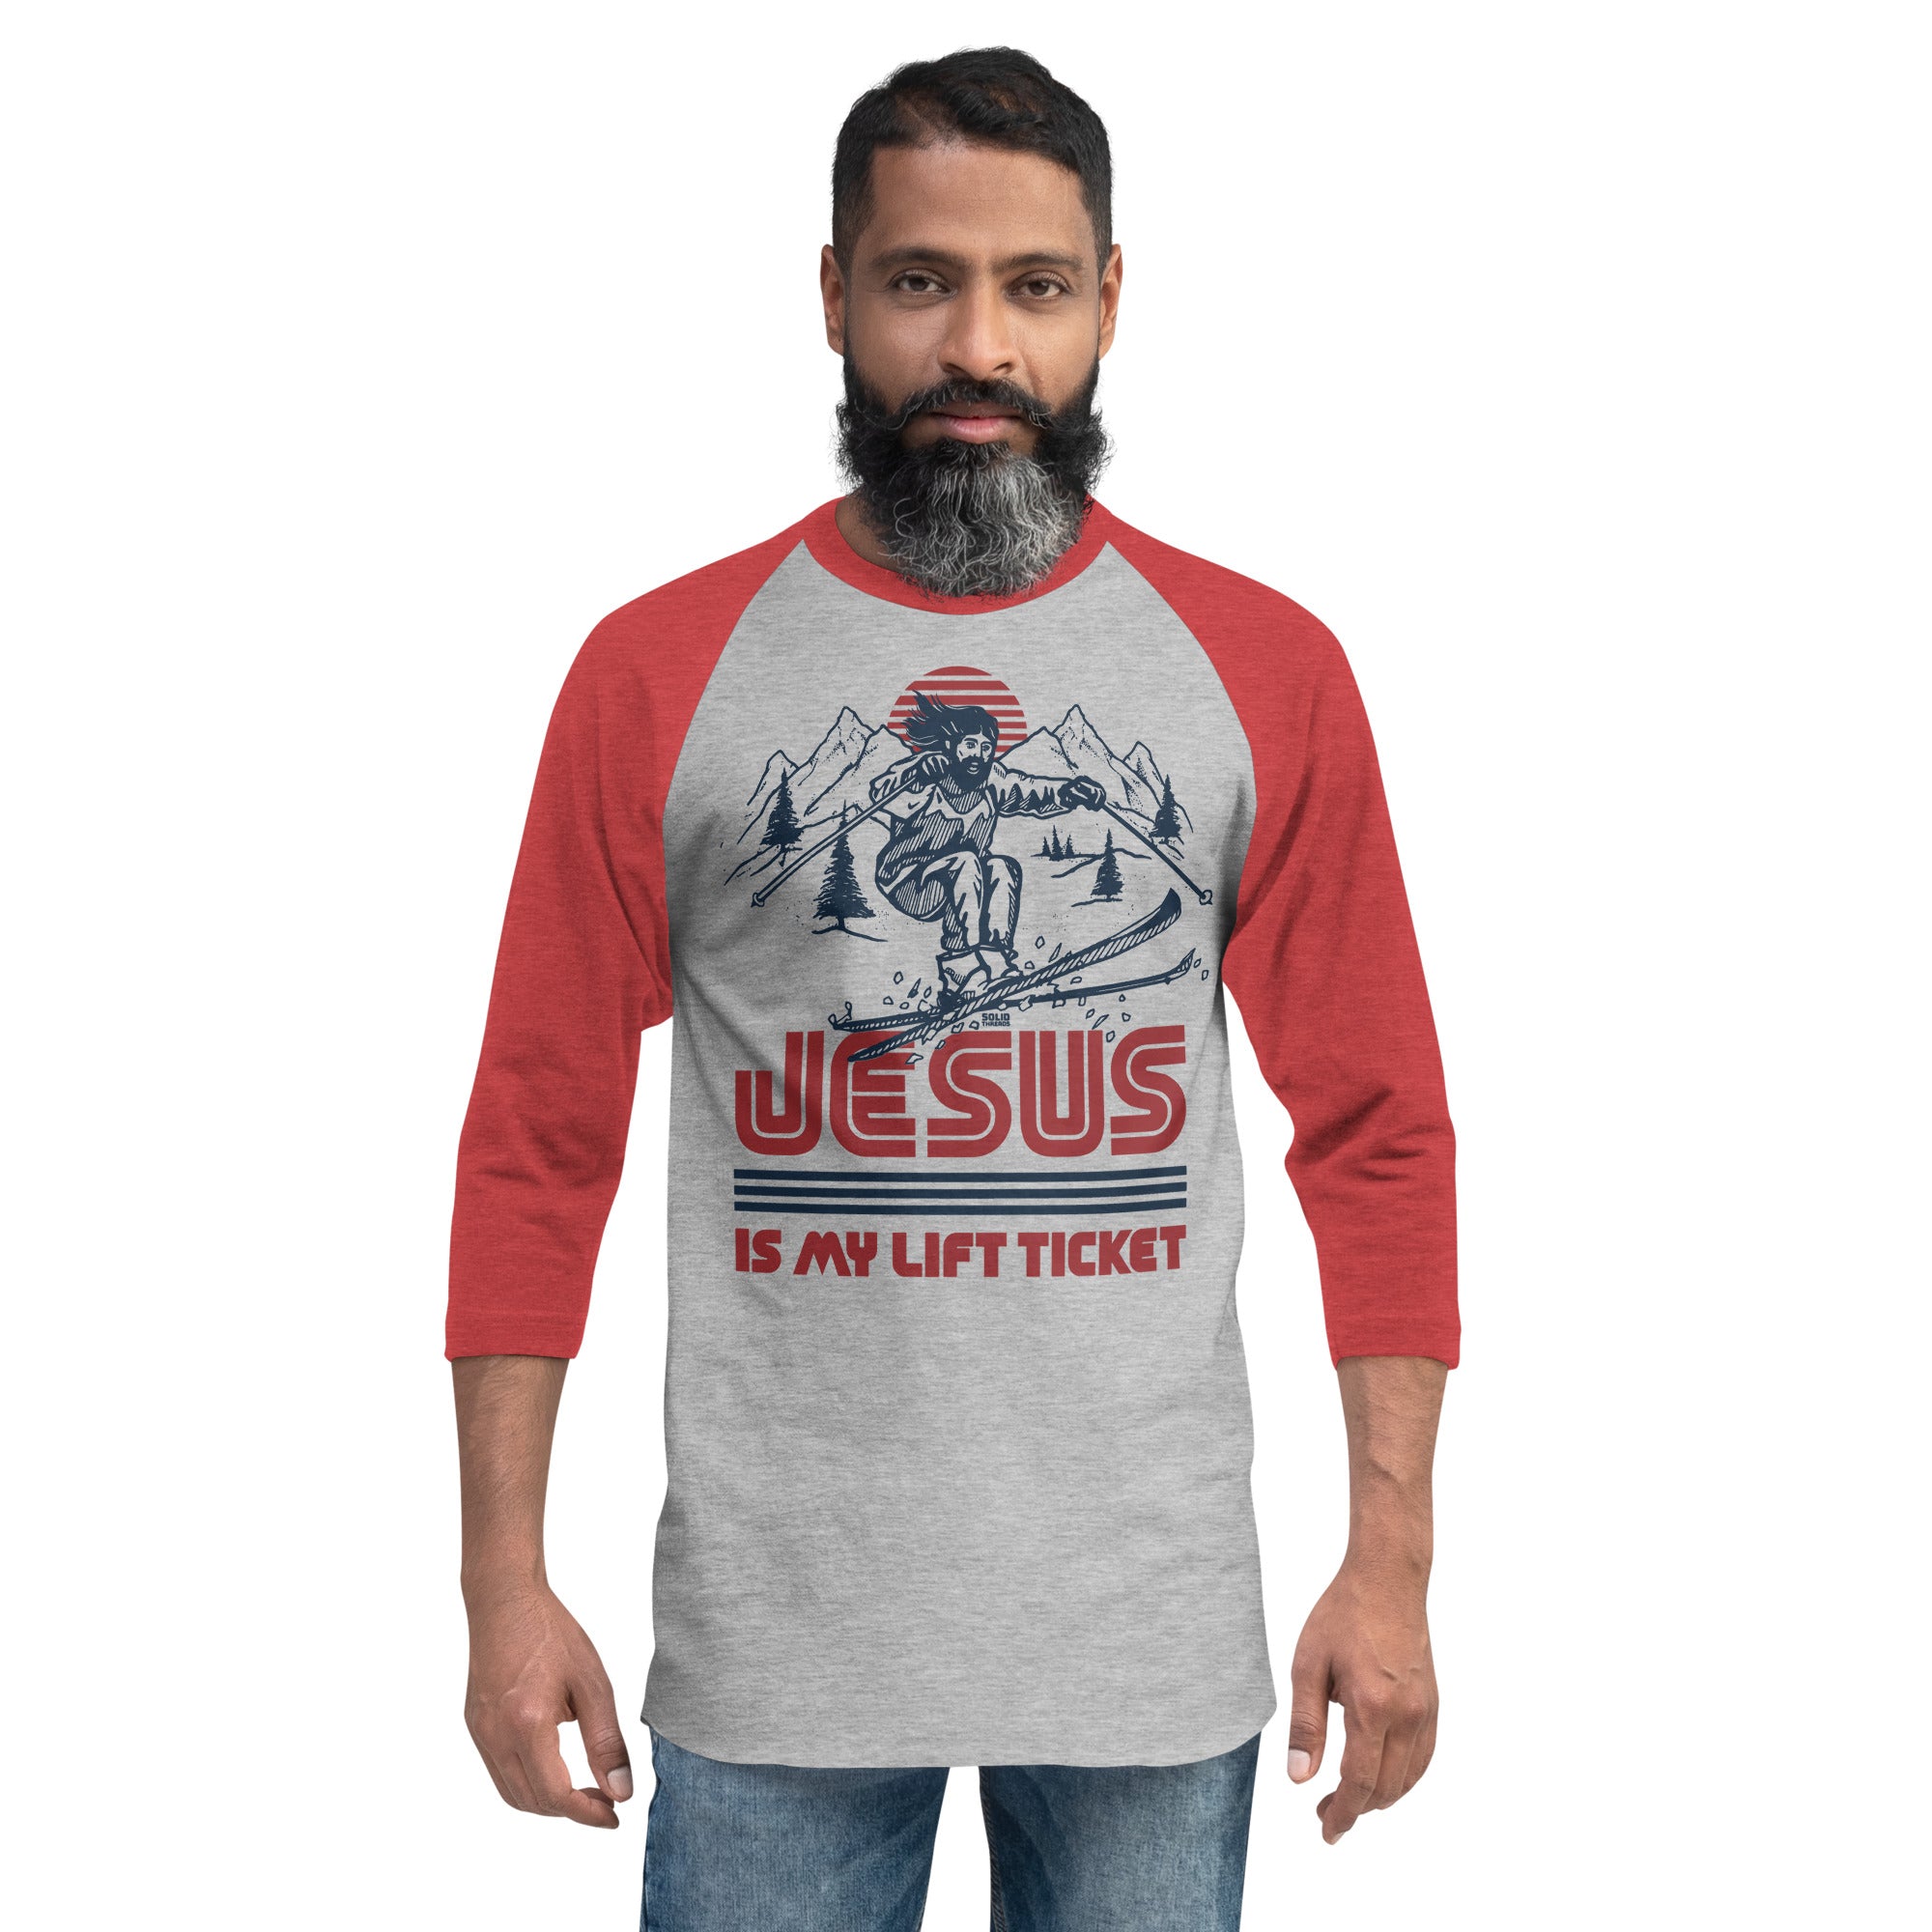 Jesus is My Lift Ticket Funny Graphic Raglan Tee | Vintage Skiing Baseball T-shirt on Male Model | Solid Threads